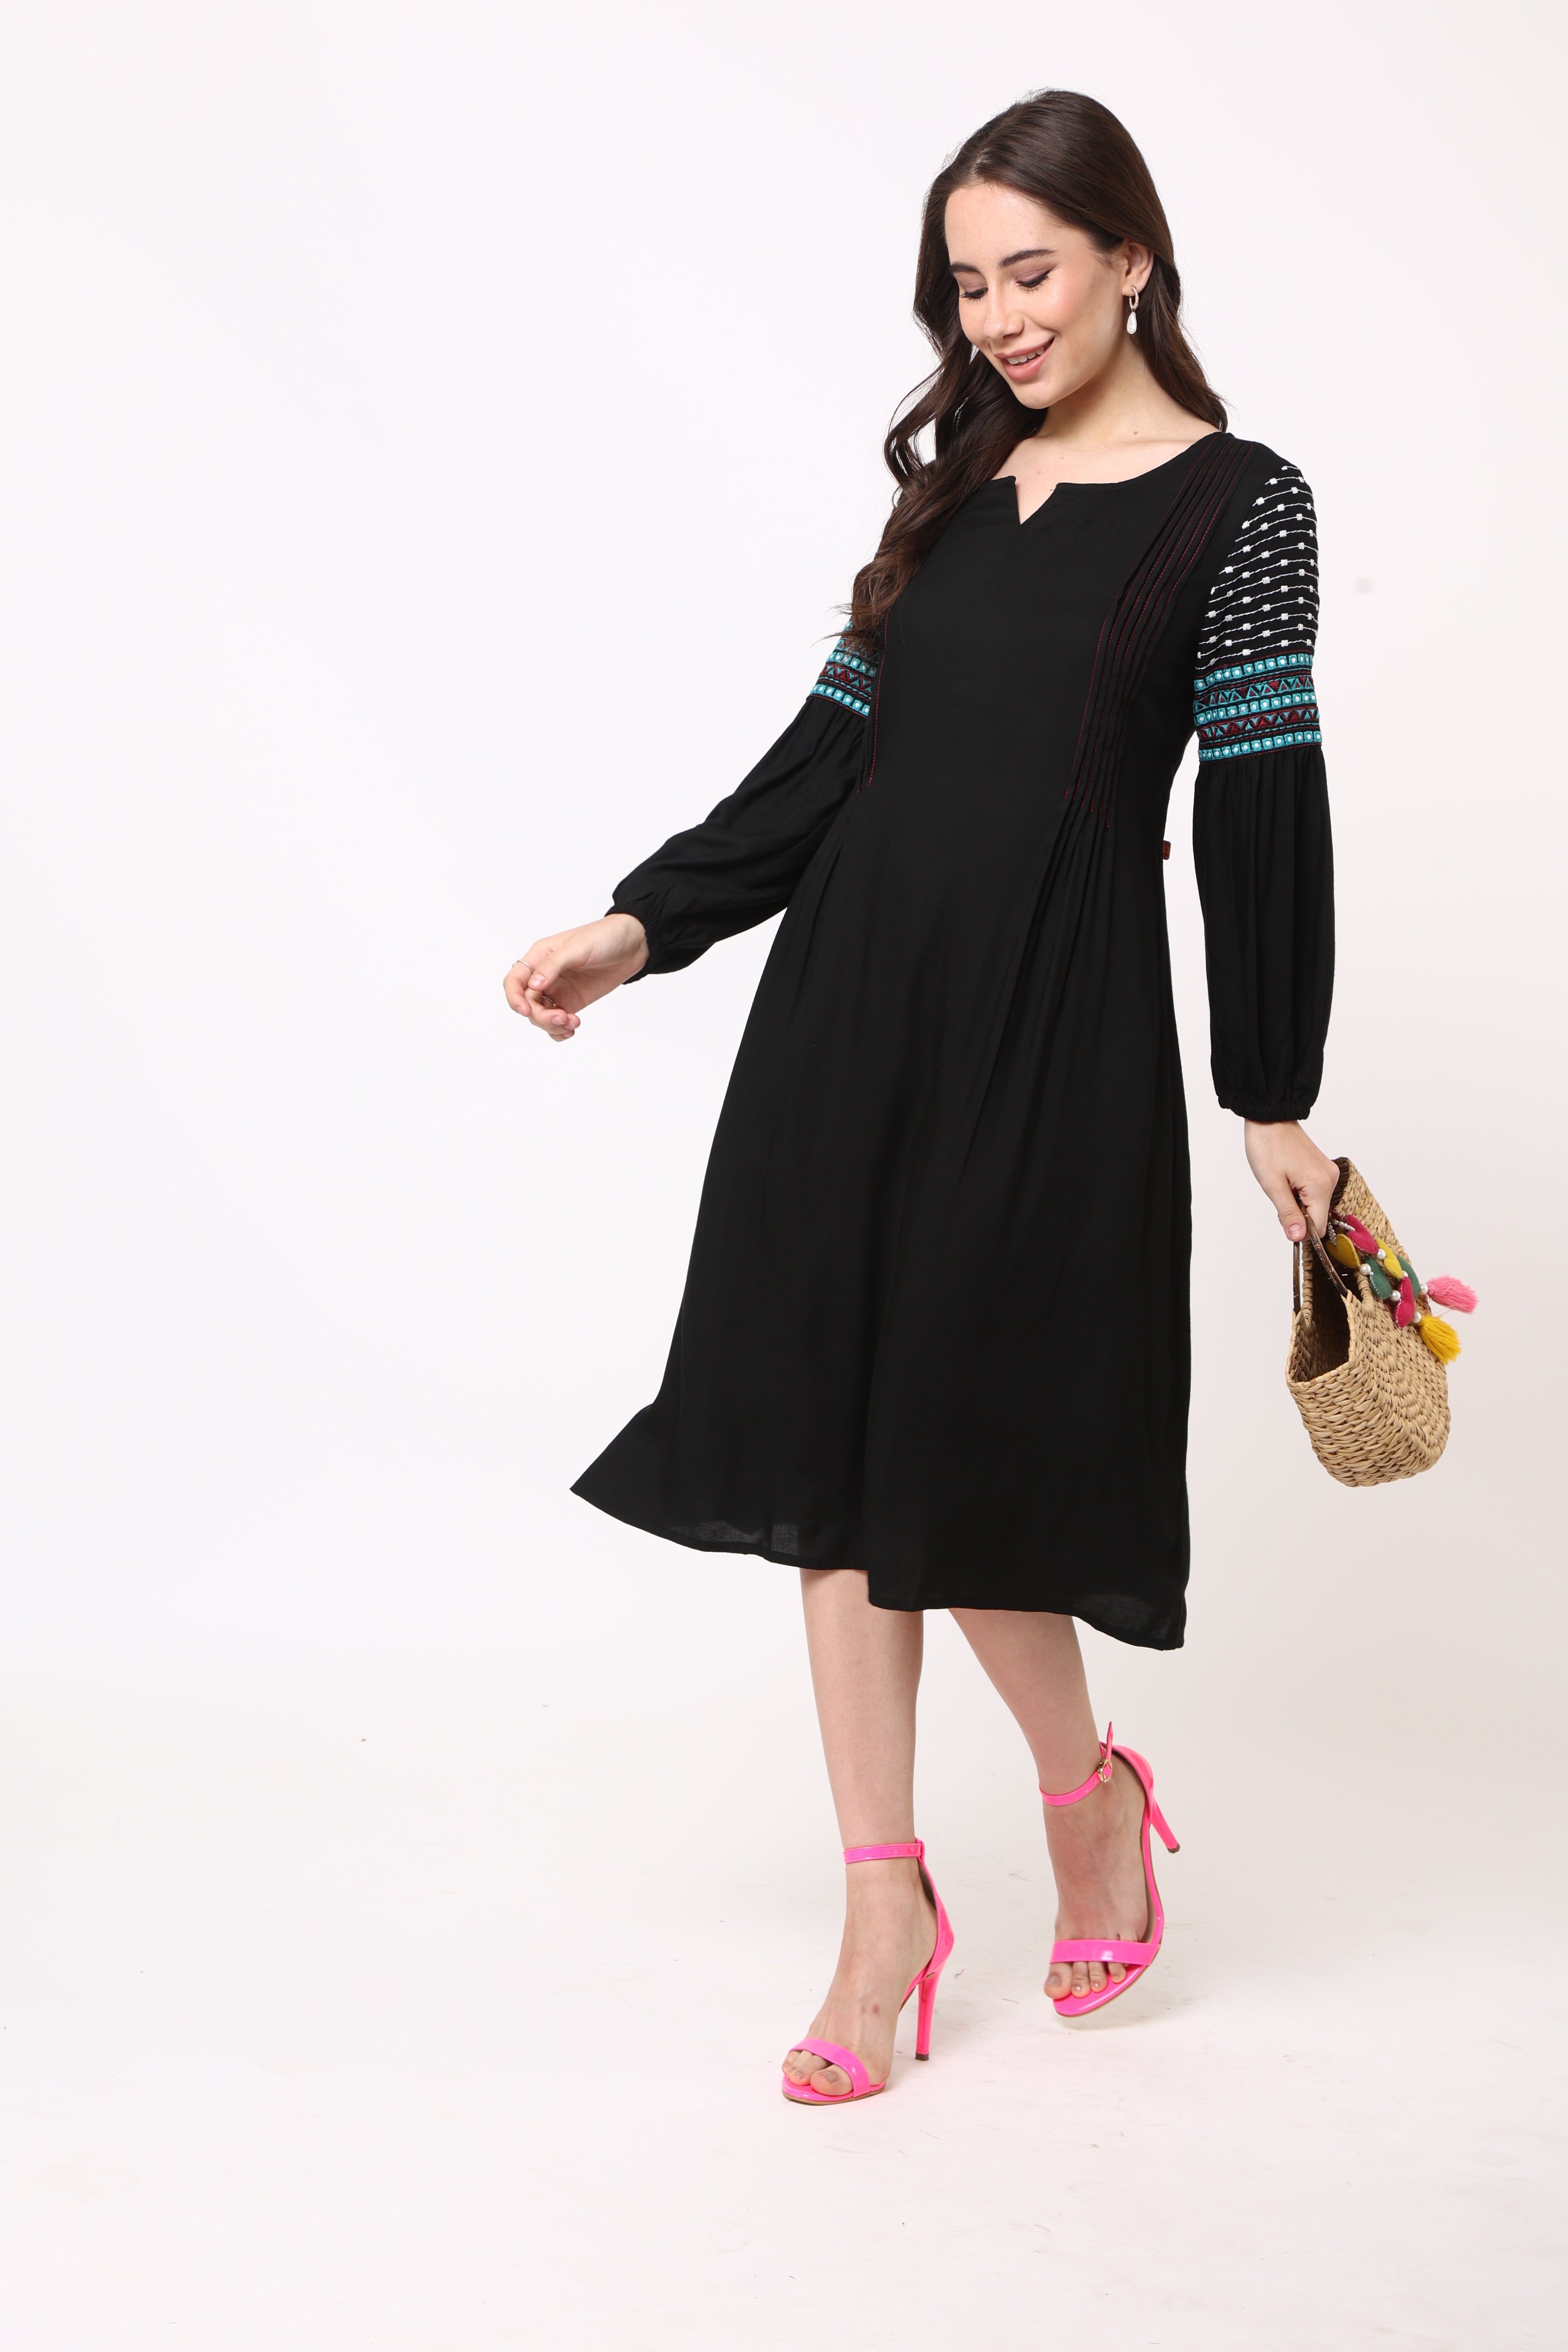 Black Dress With Embroidered Sleeves